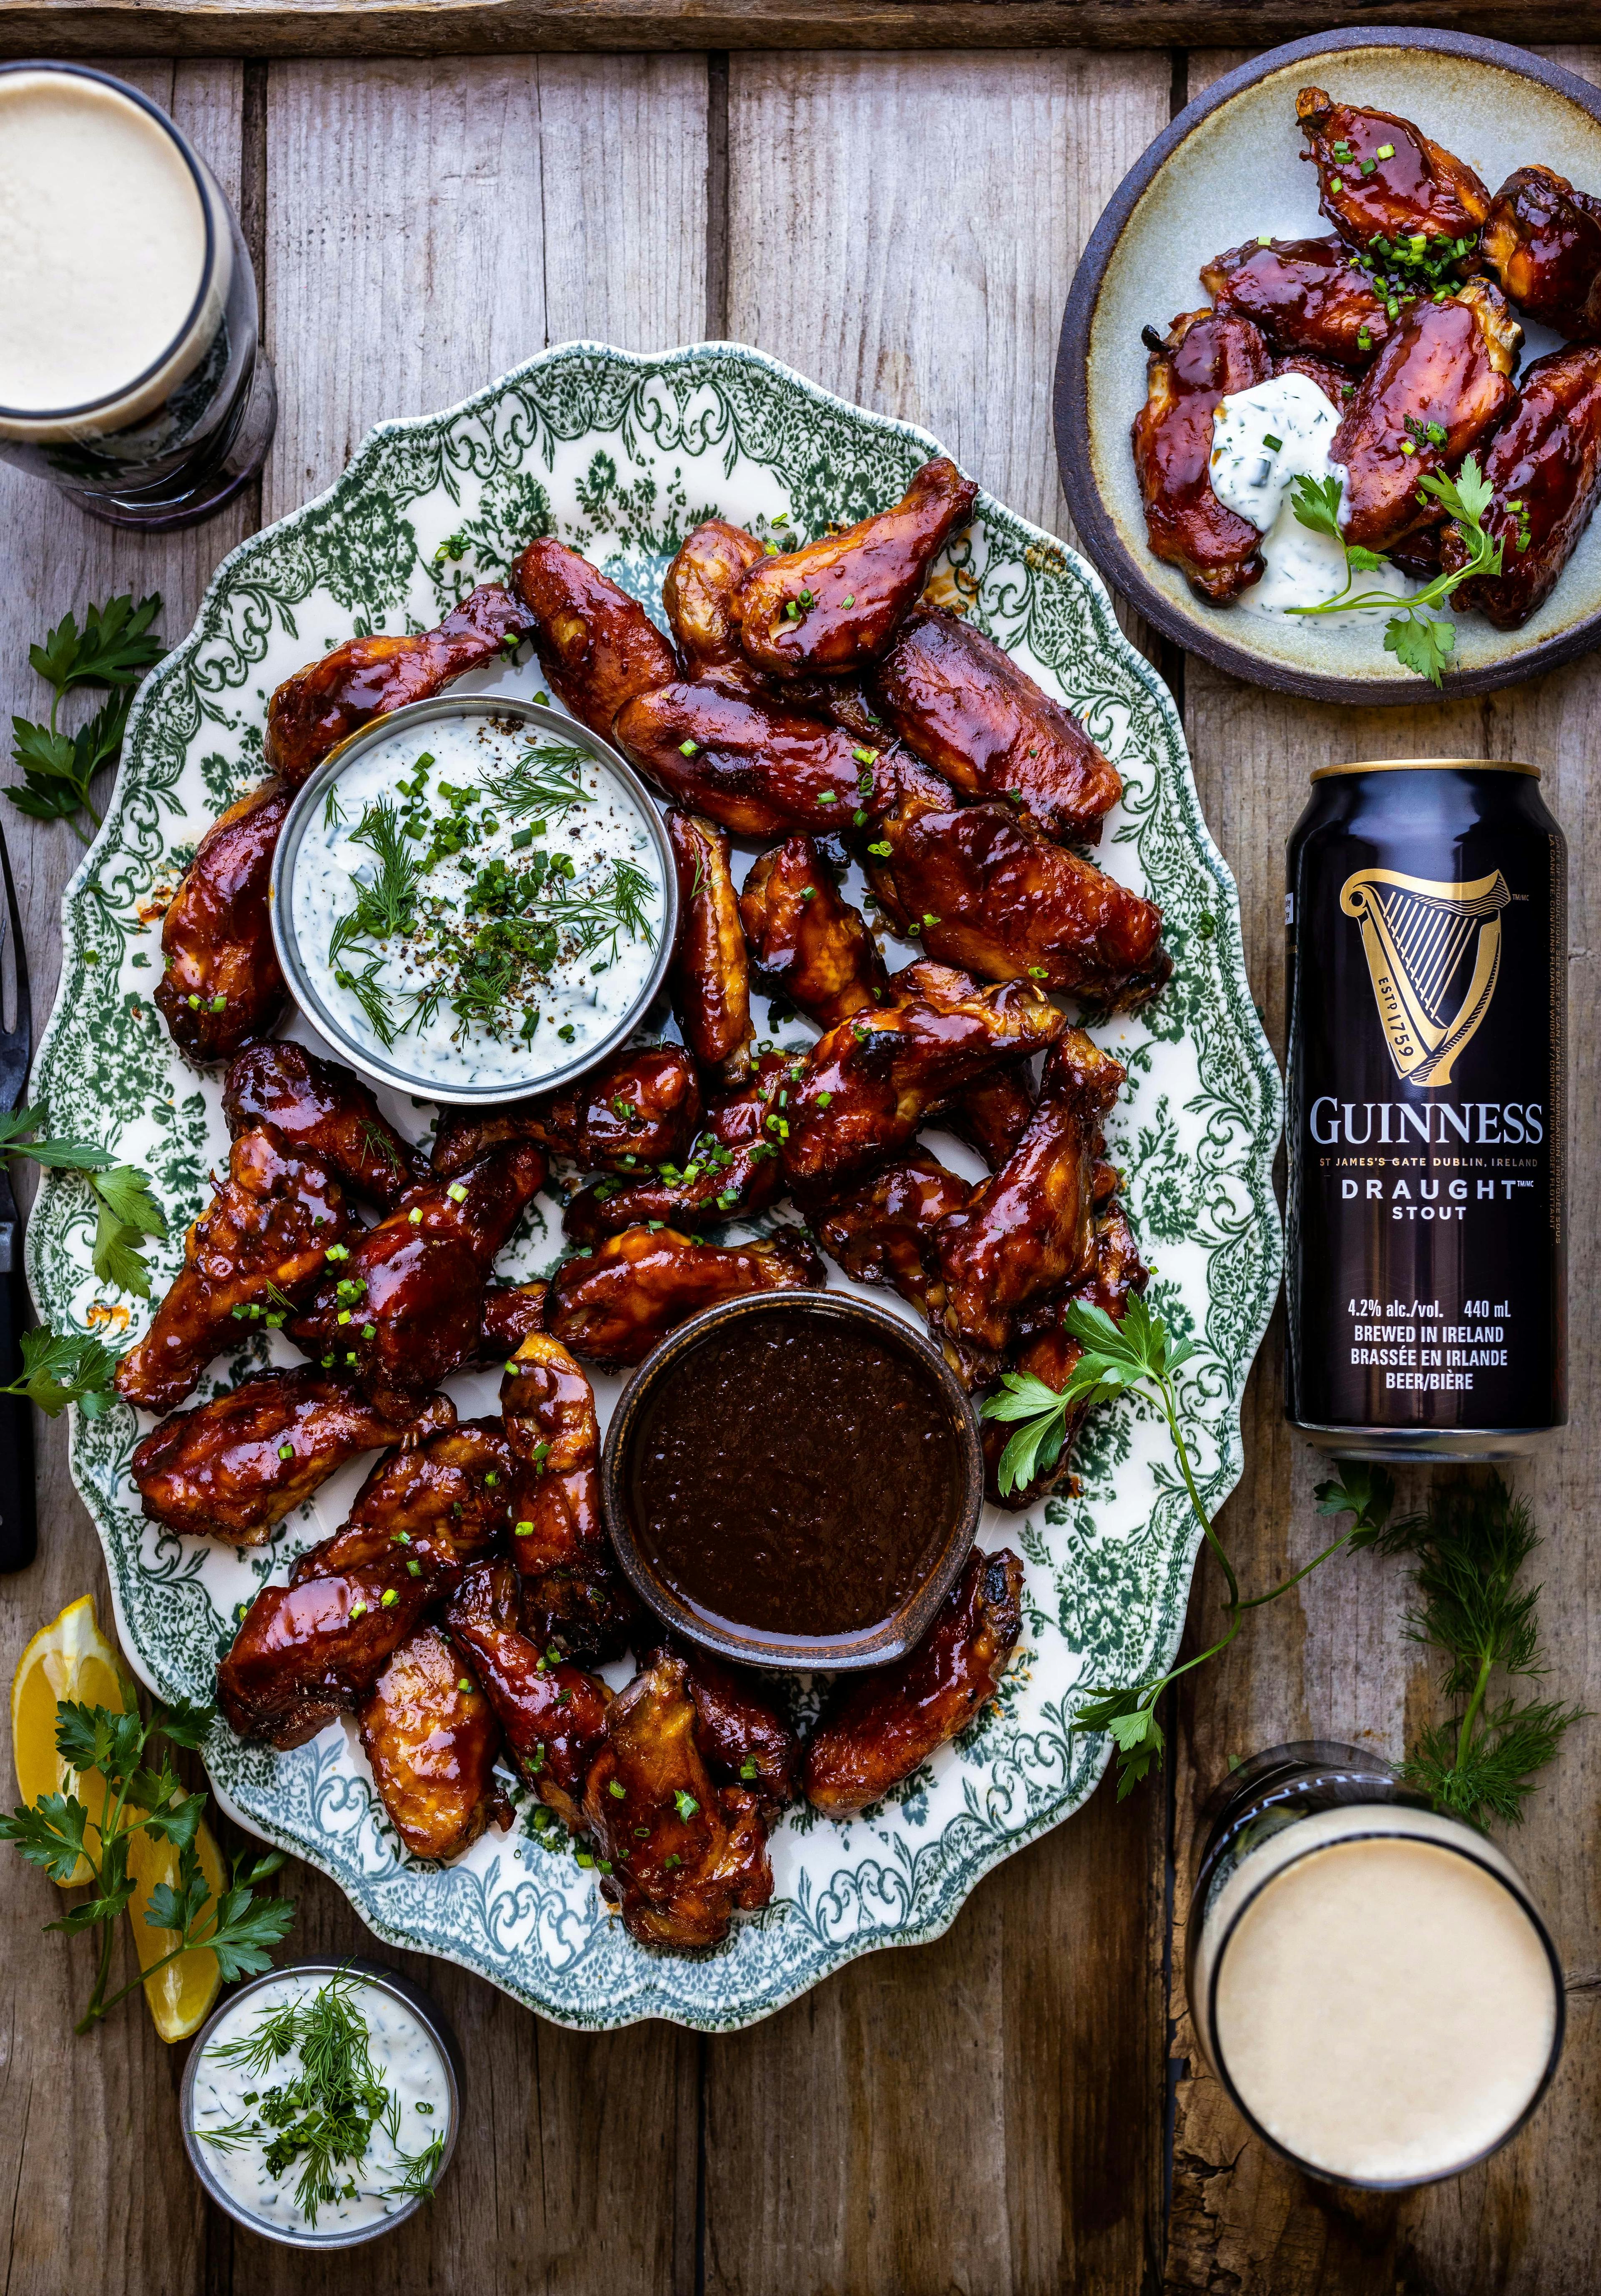 Guinness Grilled BBQ wings 